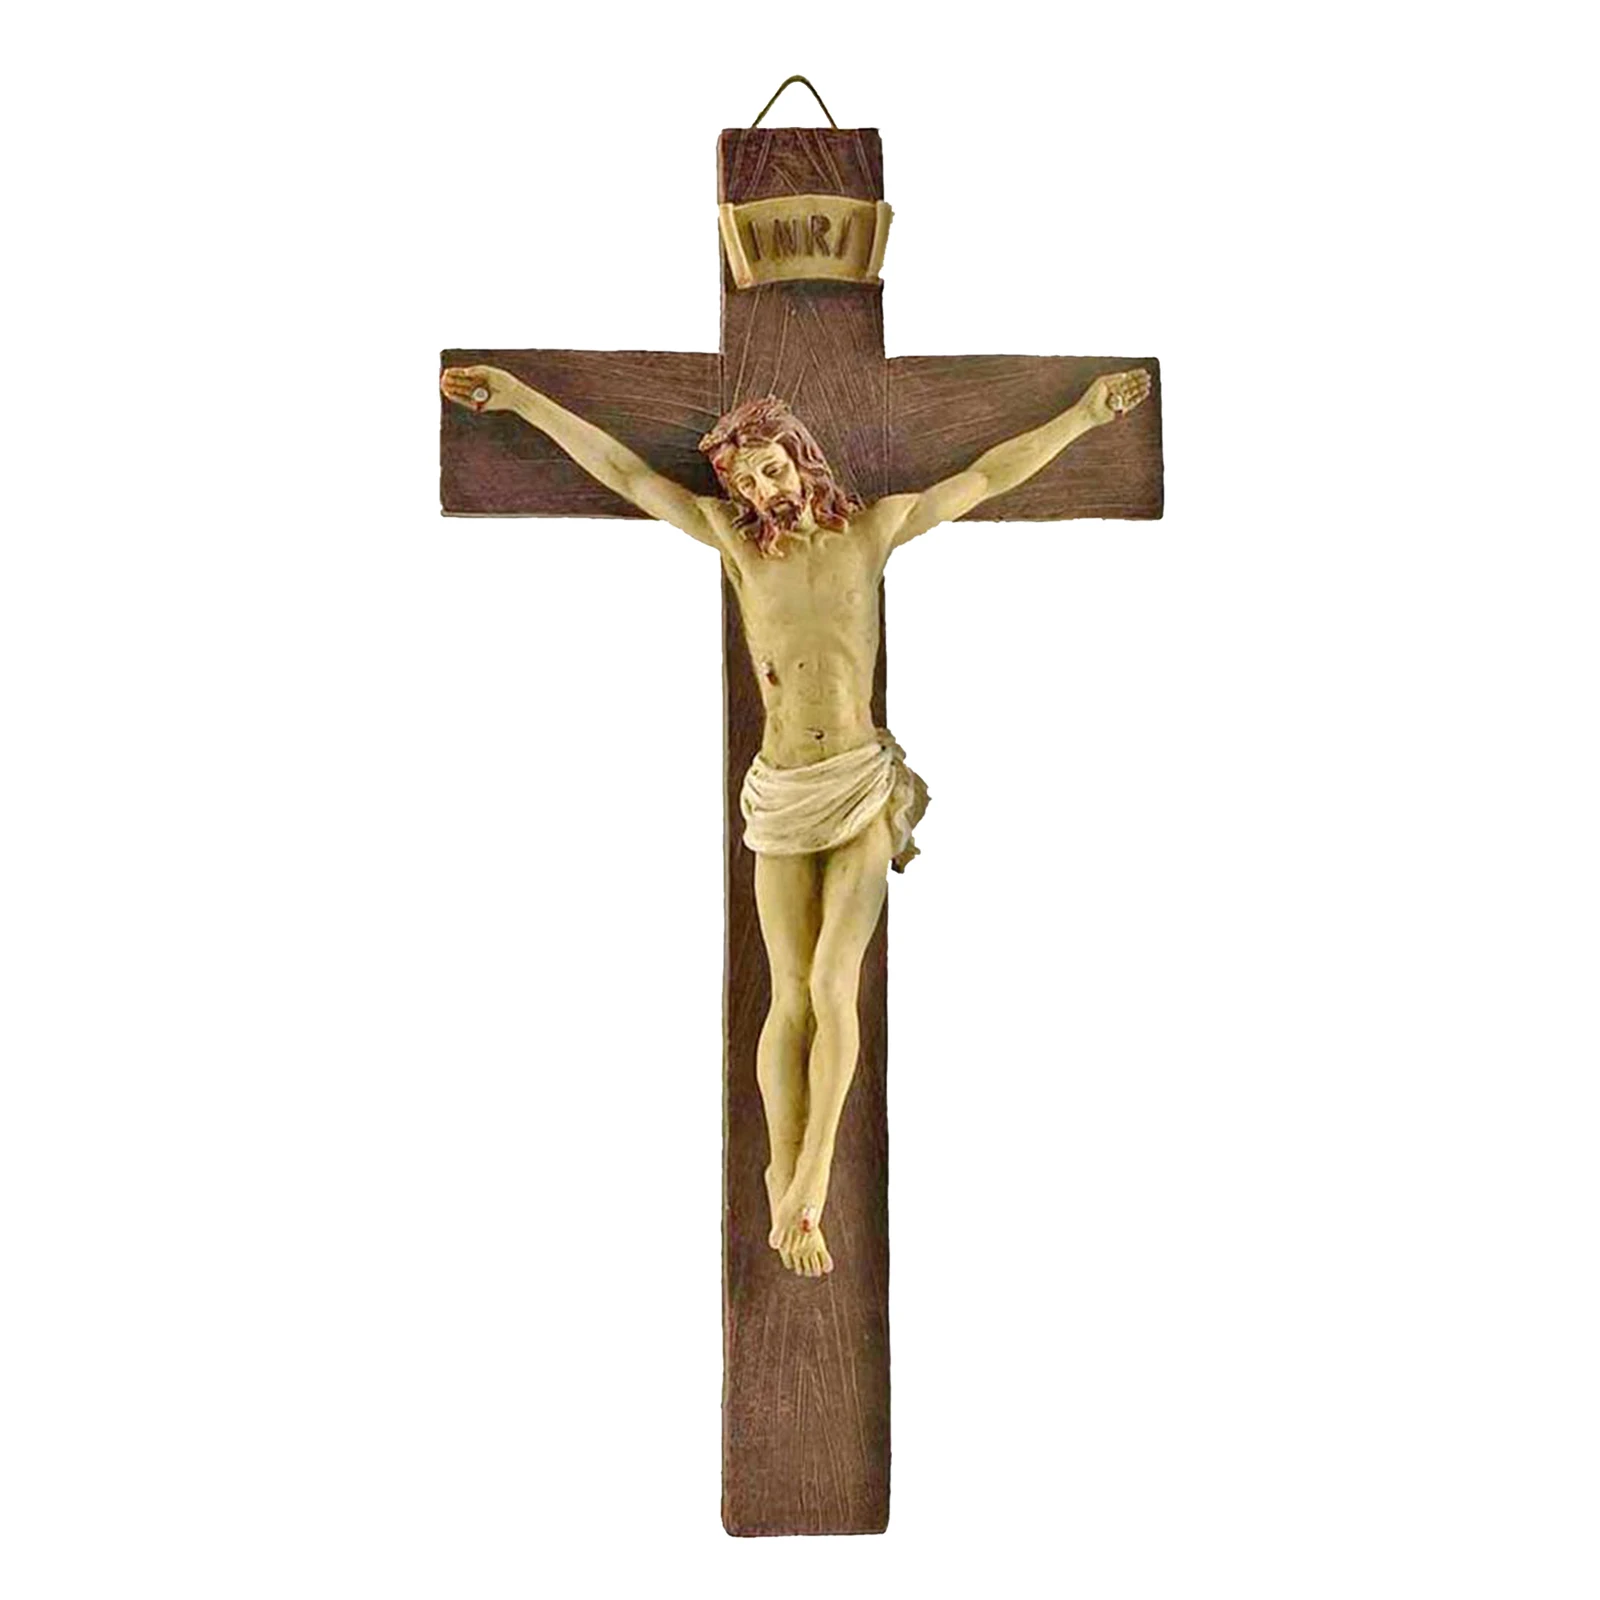 Resin Crucifix Jesus Christ Cross Statue Figurine Perfect Gifts for Car Home Chapel Decoration Collective